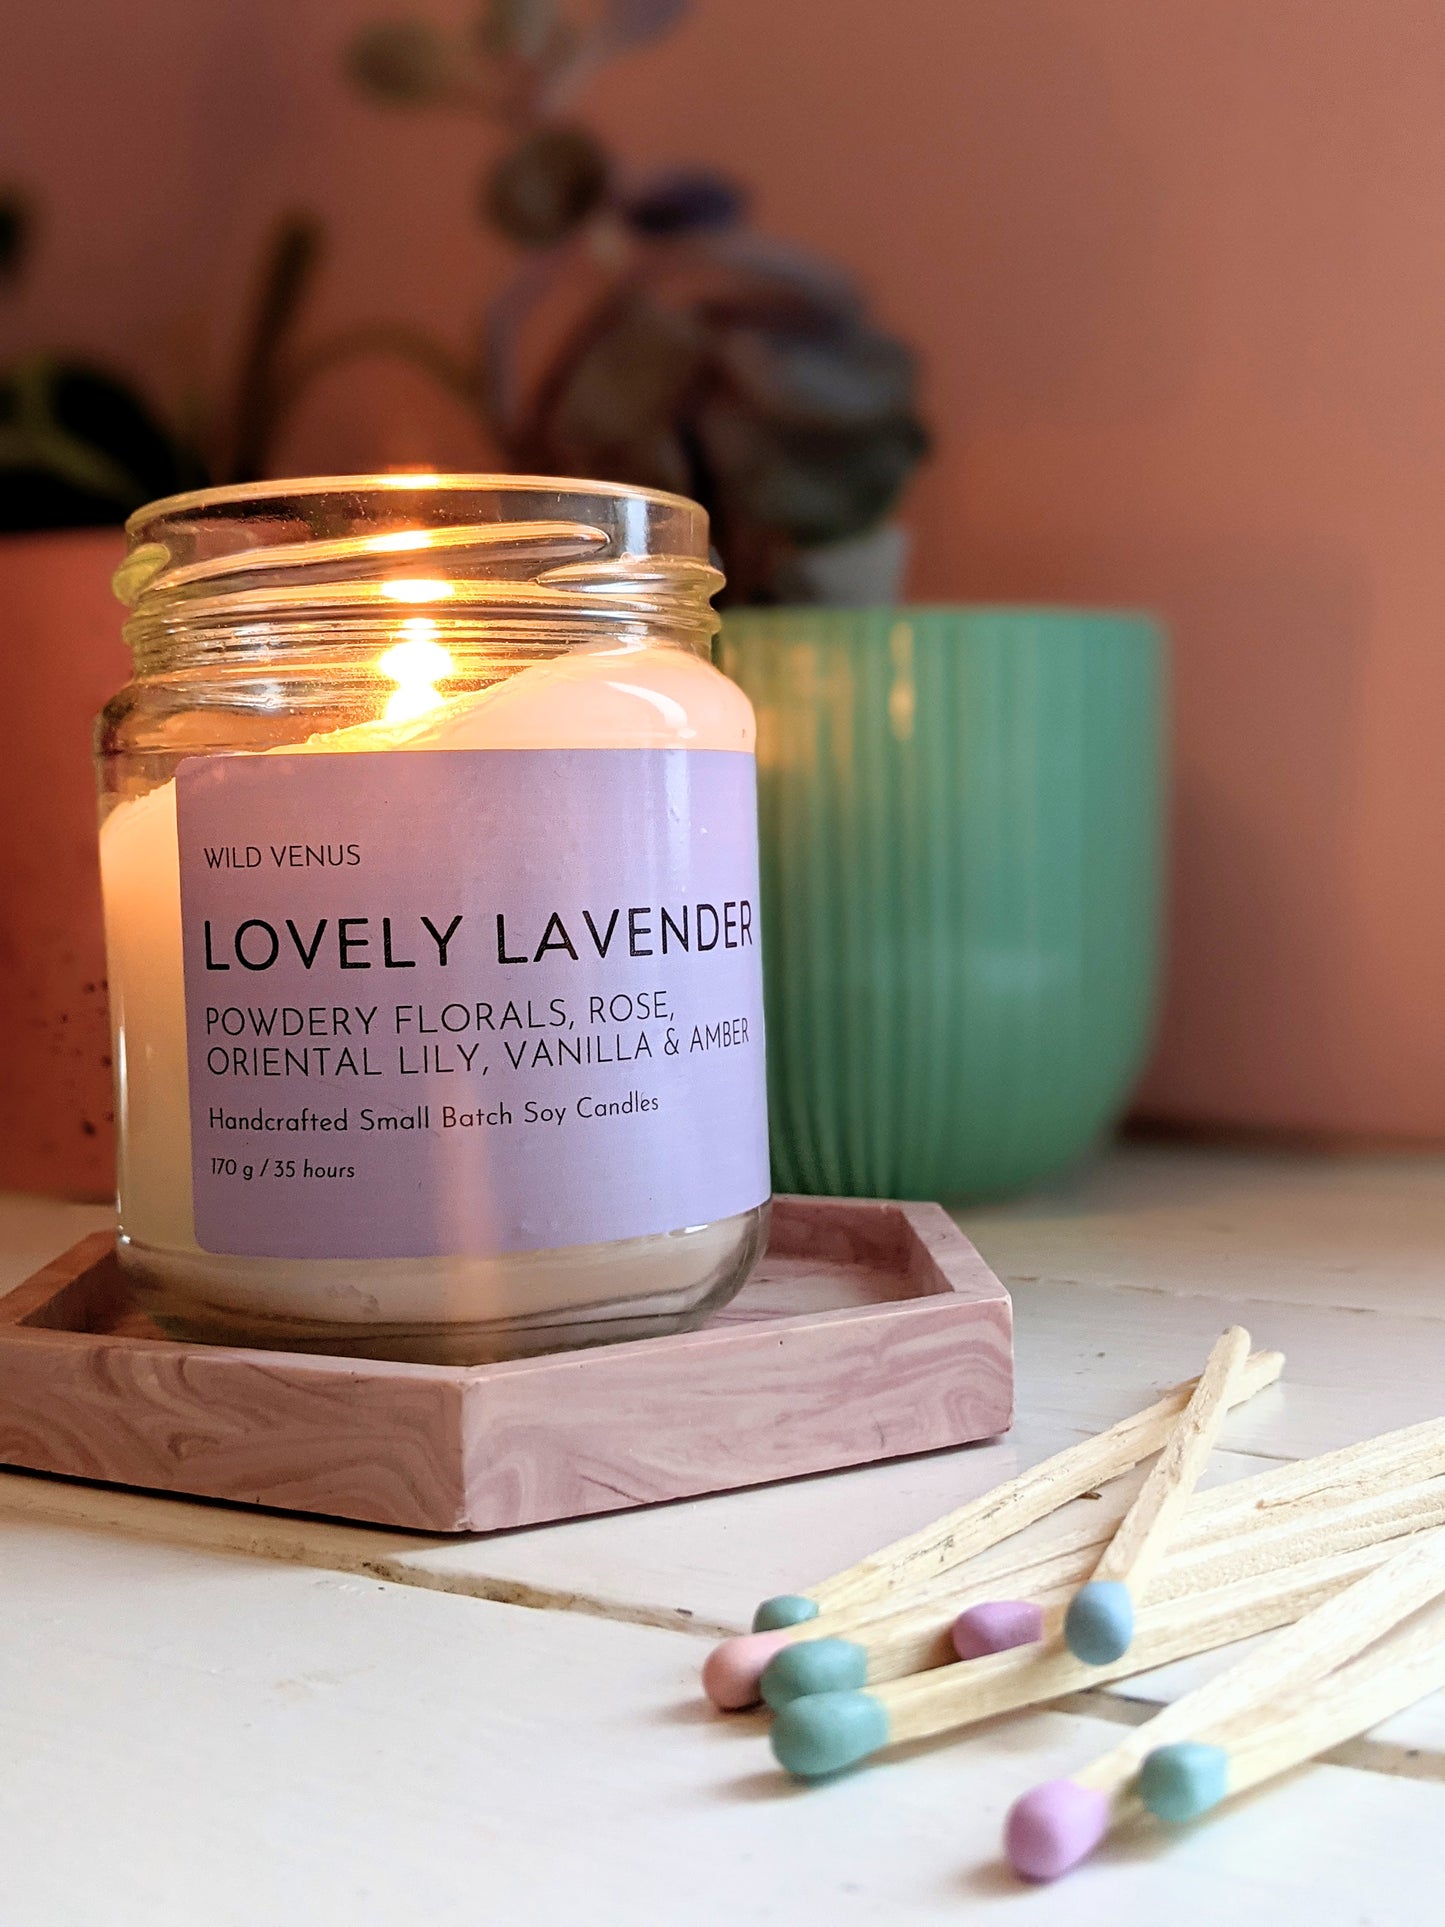 A lit Lovely Lavender candle on a pink coaster and some pastel matches in the foreground.